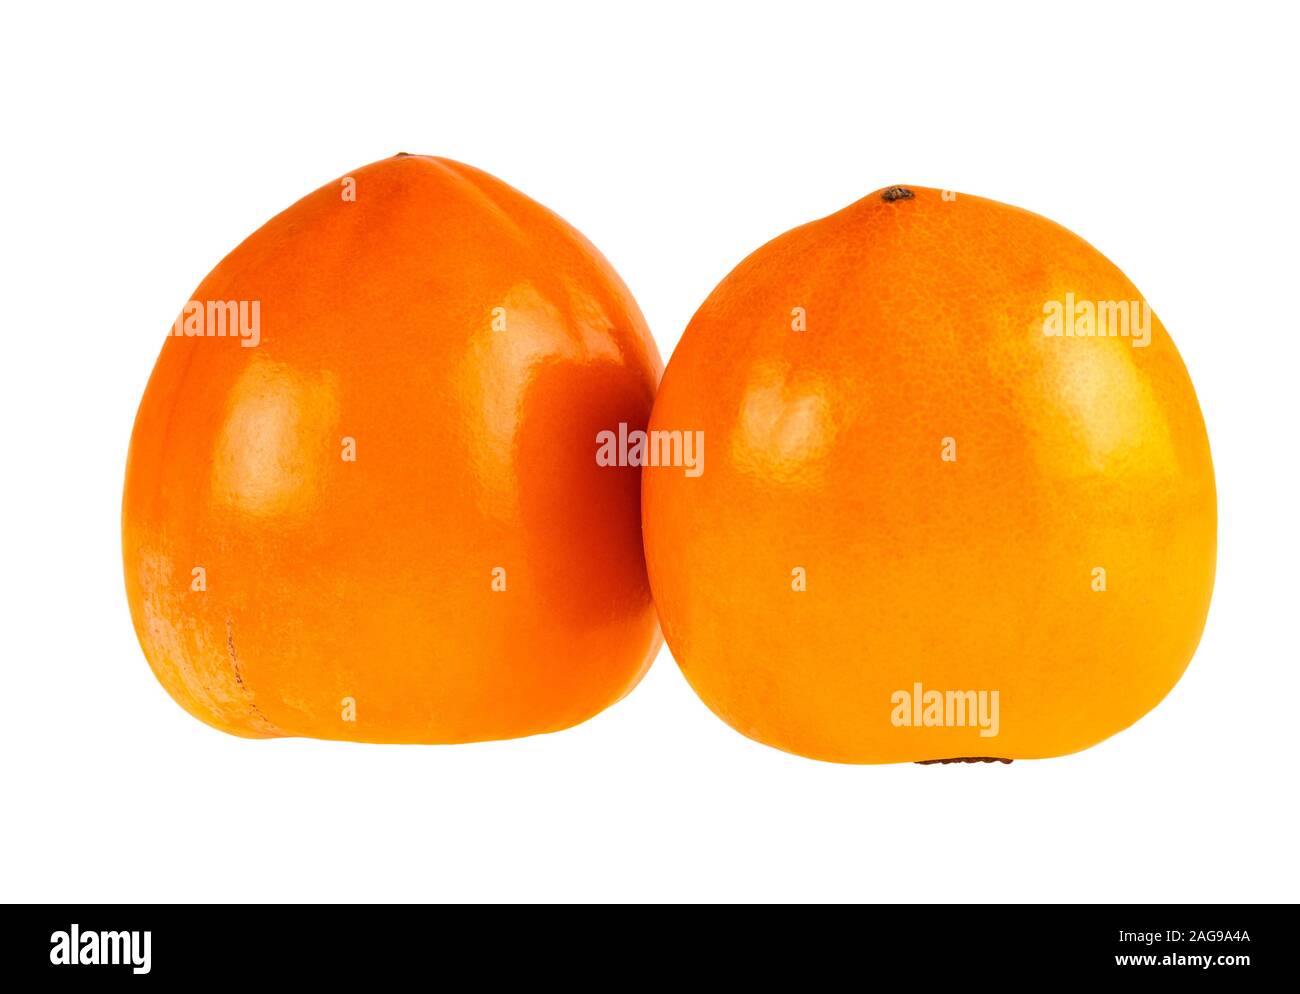 Two Persimmon Whole Fruit Closeup Isolated On White. Persimmon Retouched Image. Stock Photo